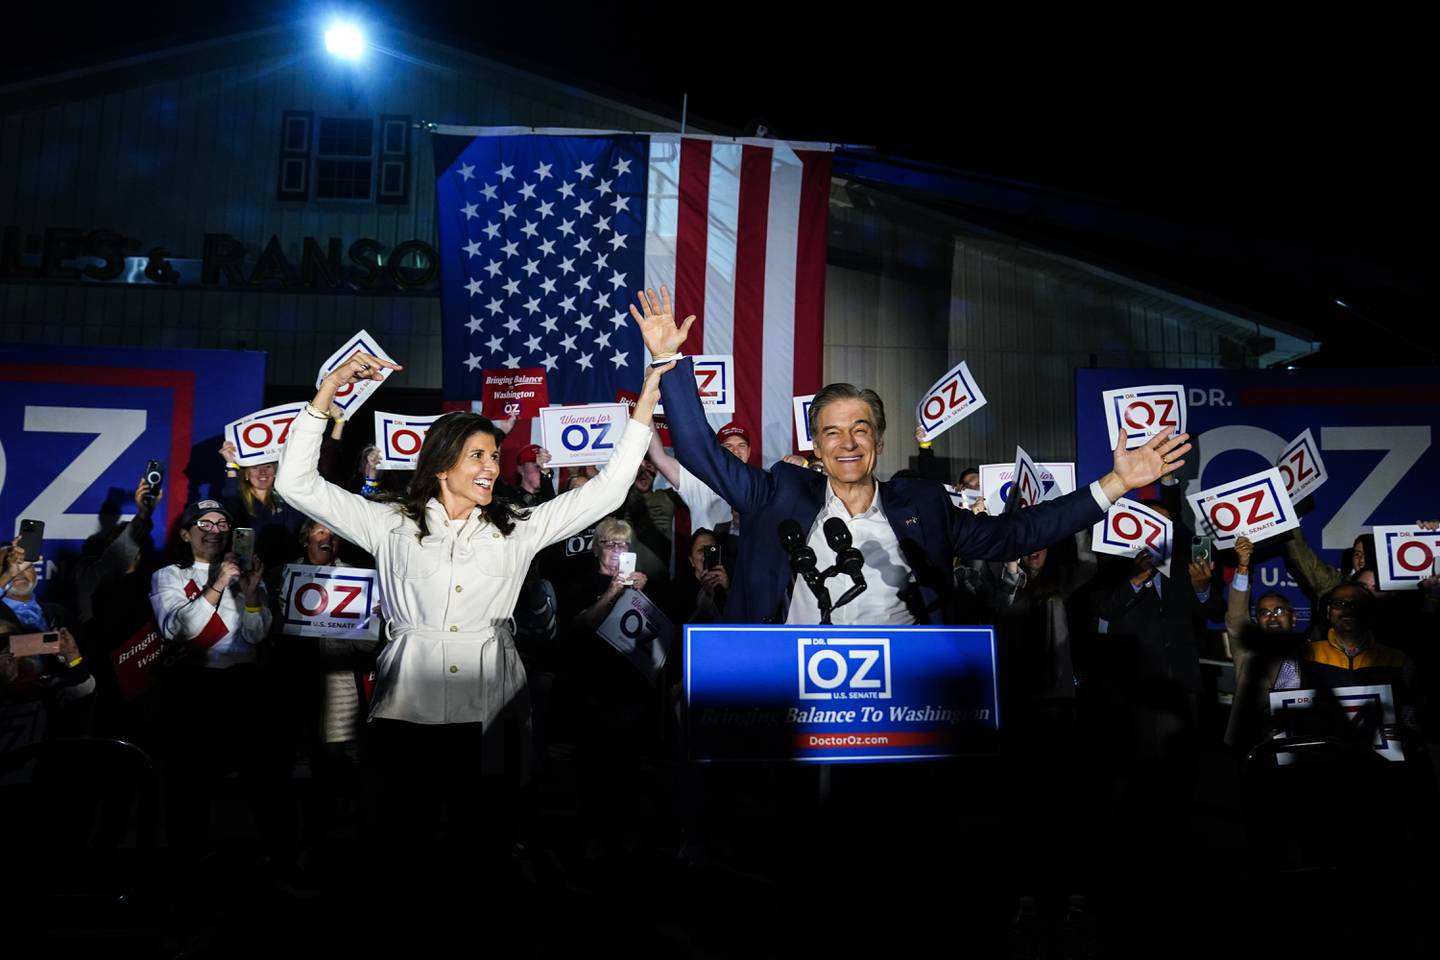 Mehmet Oz, a Republican candidate for U.S. Senate in Pennsylvania, is joined by former U.N. Ambassador Nikki Haley during campaign rally in Pennsburg, Pa., Monday, Nov. 7, 2022. (AP Photo/Matt Rourke)